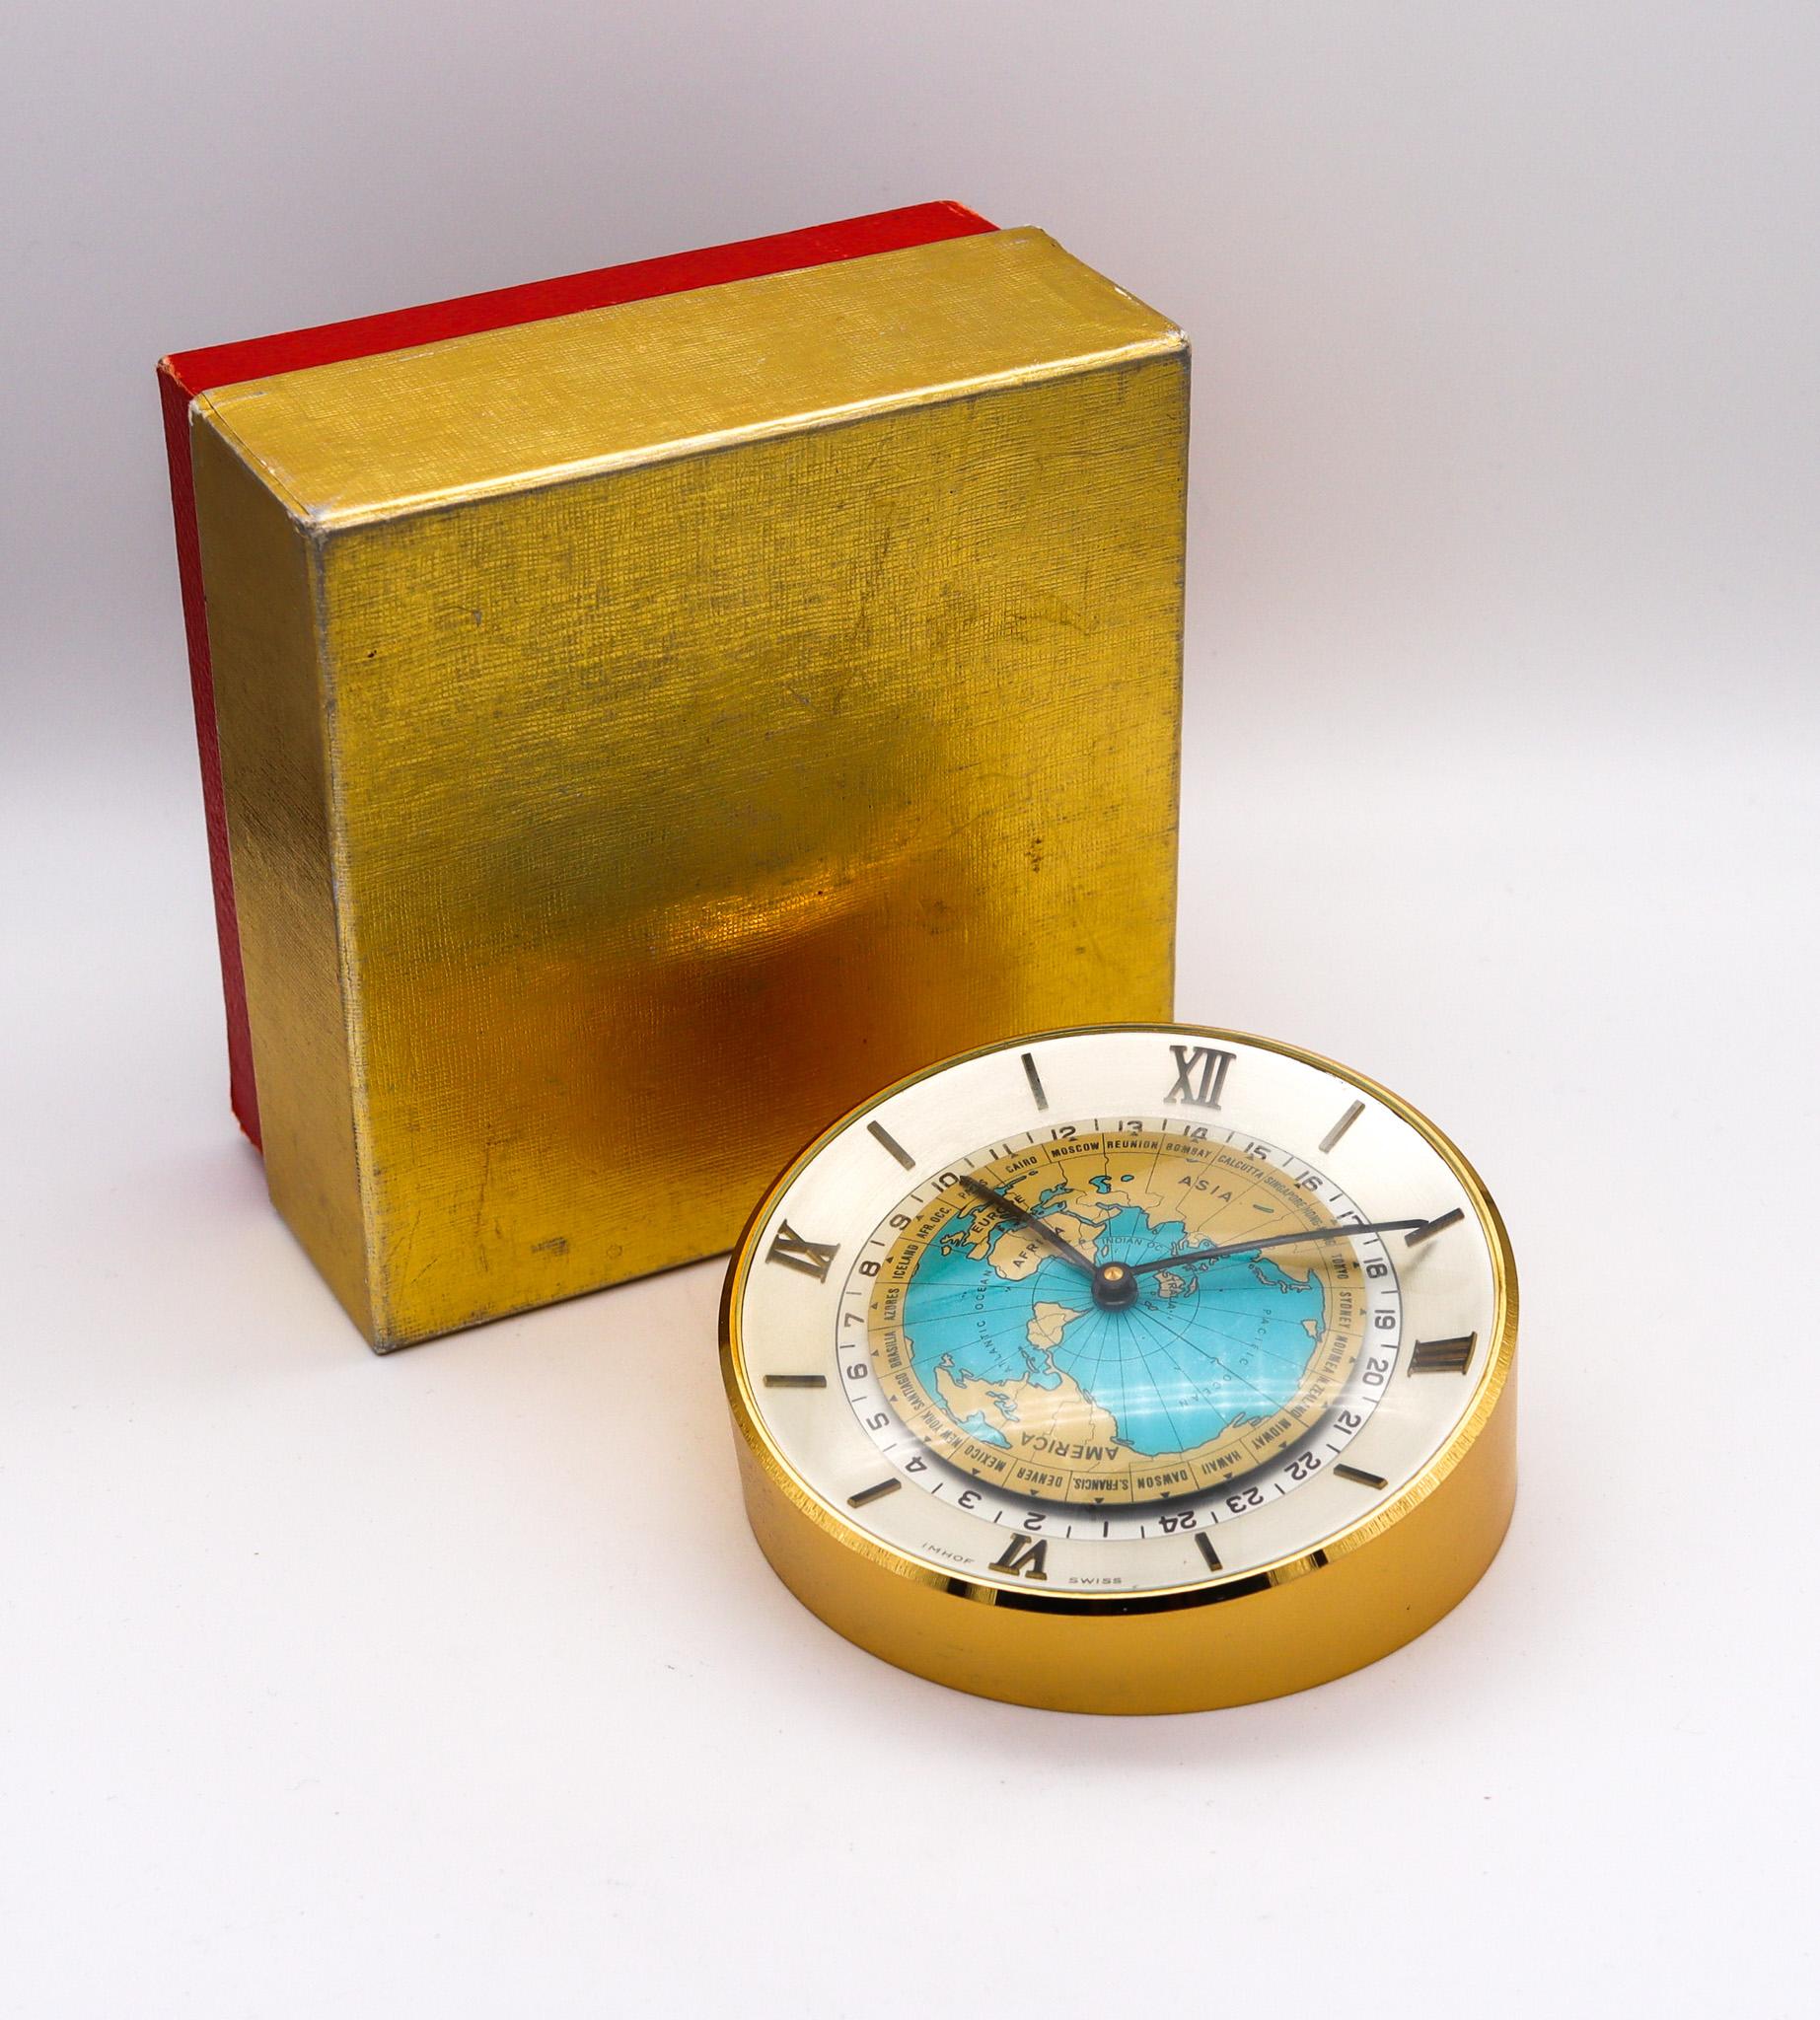 Desk world timer clock designed by Arthur Imhof.

Fabulous and highly attractive desk-table clock, created in Switzerland by the clocks makers house of Imhof, back in the 1960. This world timer clock is rare to see in this pristine condition. Has